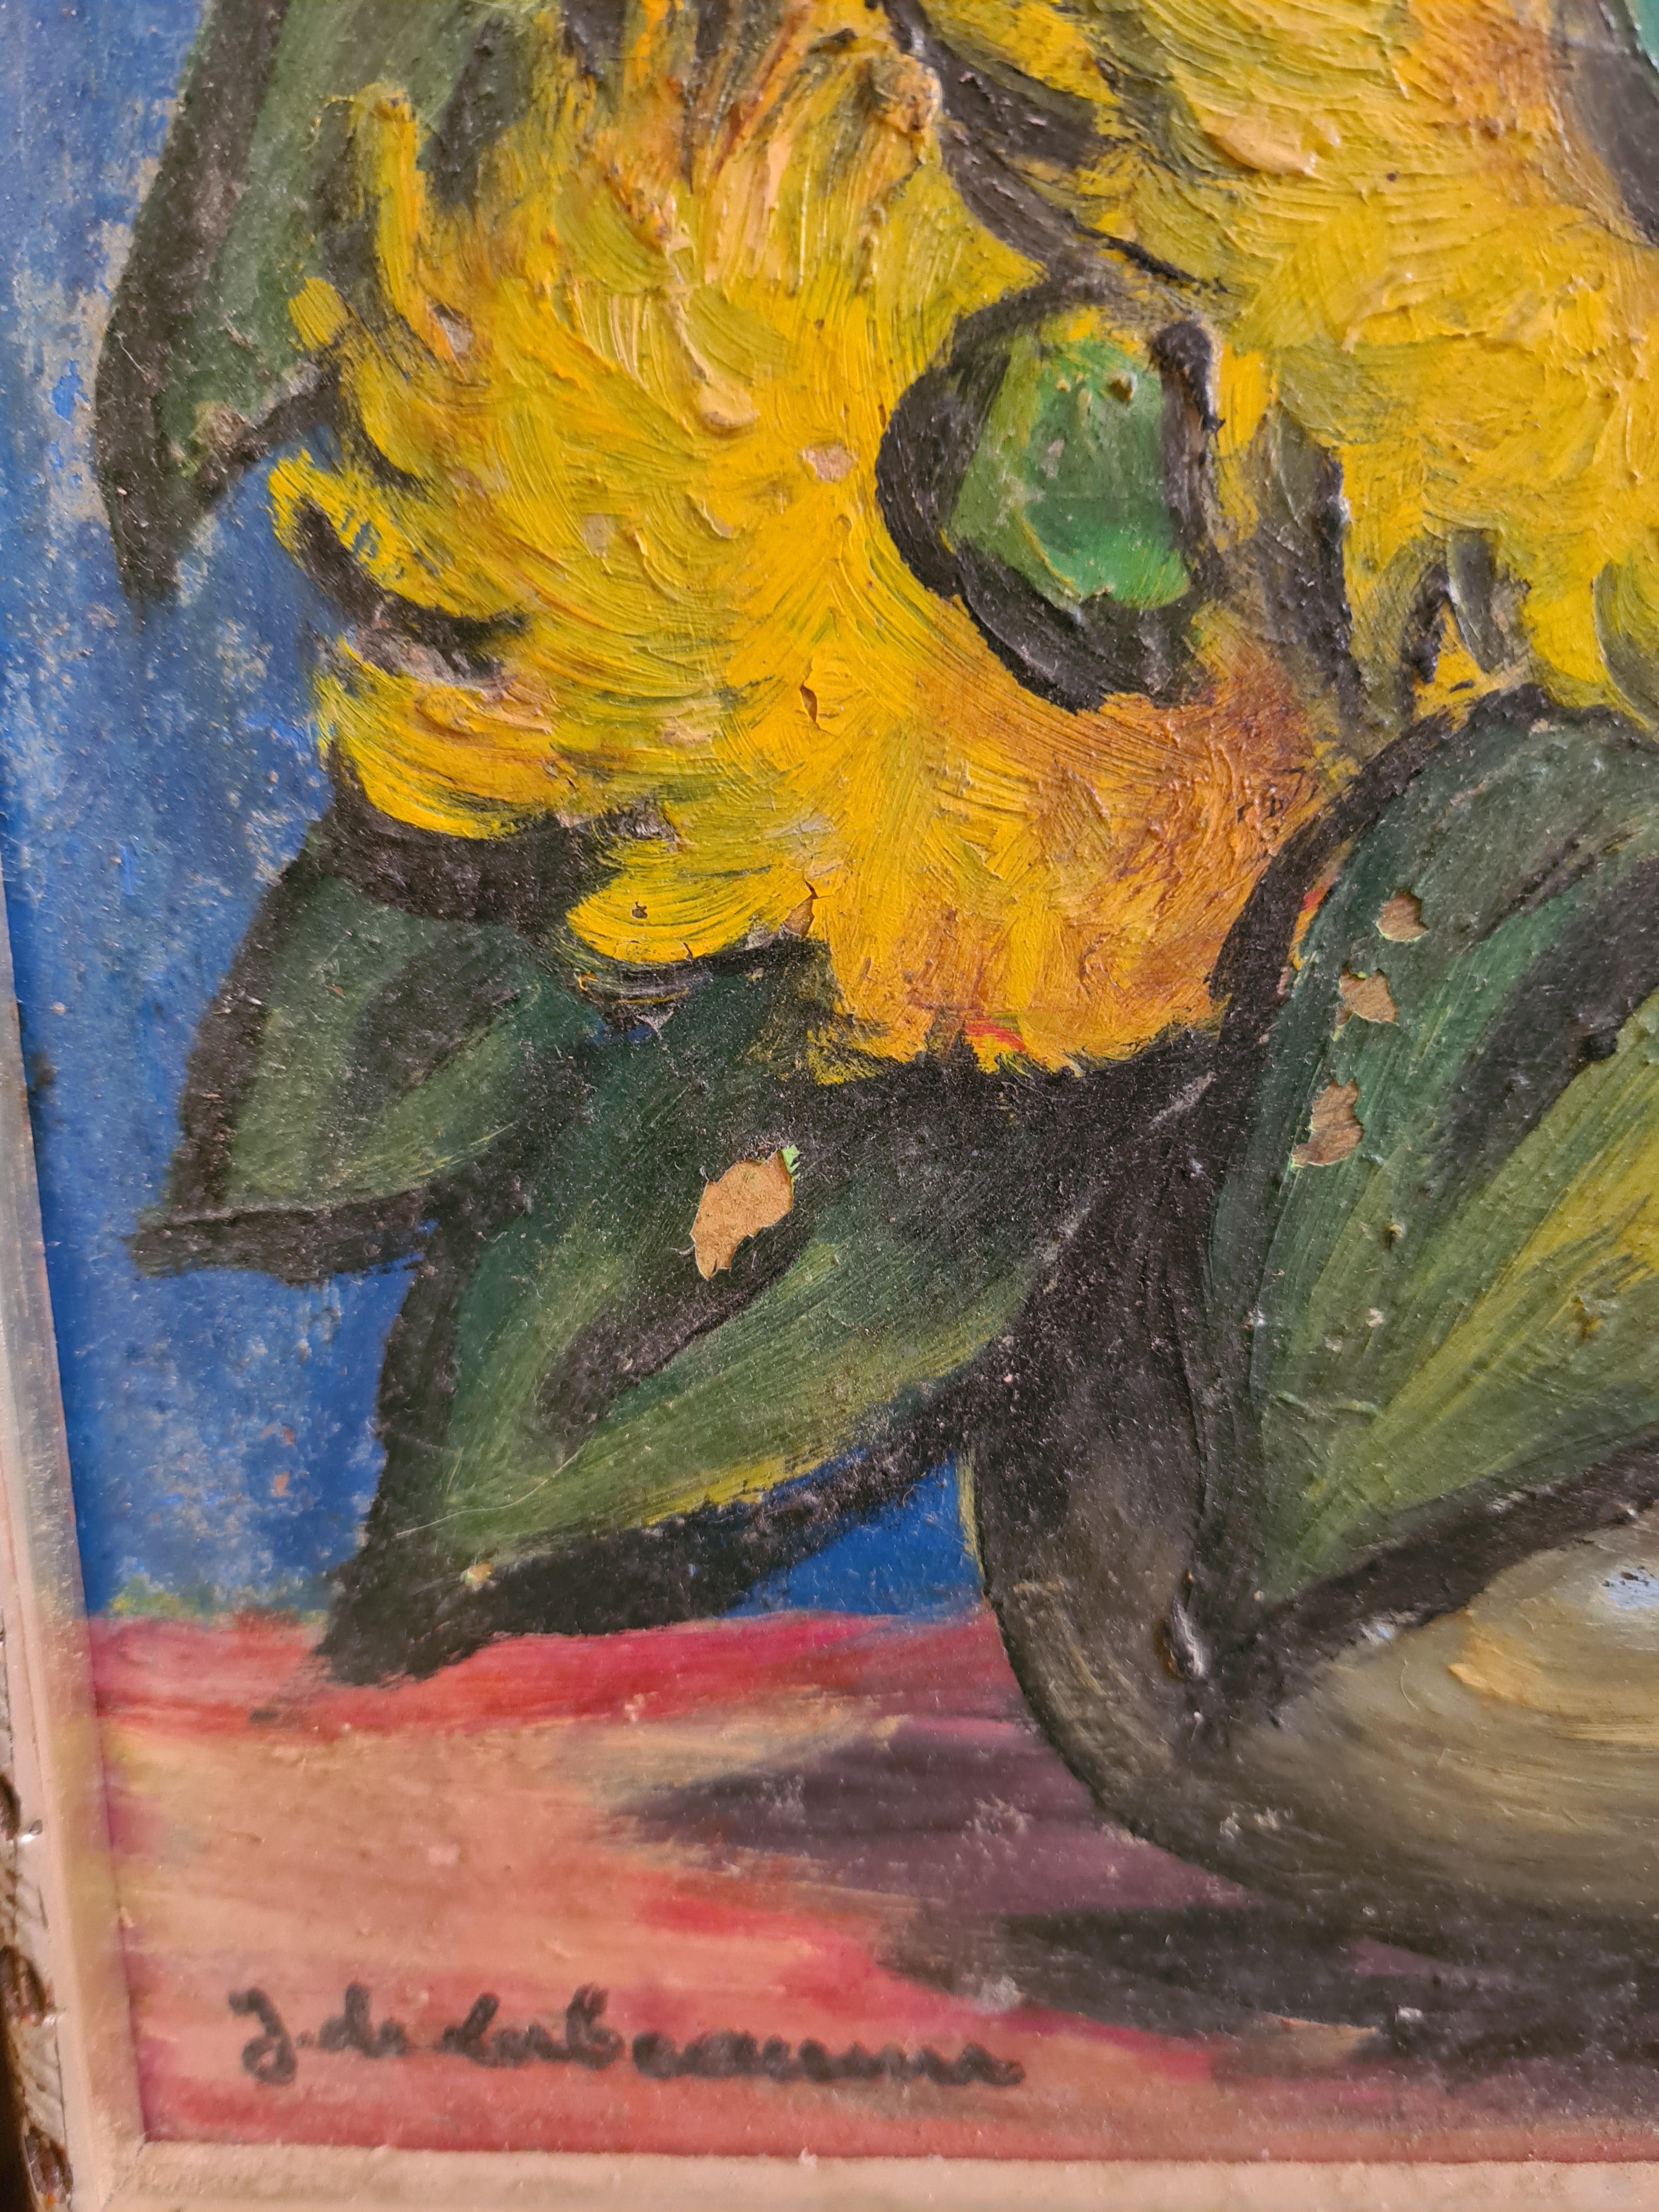 Sunflowers. 'Bateau-Lavoir' Movement Oil on Board, Hommage to Van Gogh. - Post-Impressionist Painting by Jeanne De Labeaume